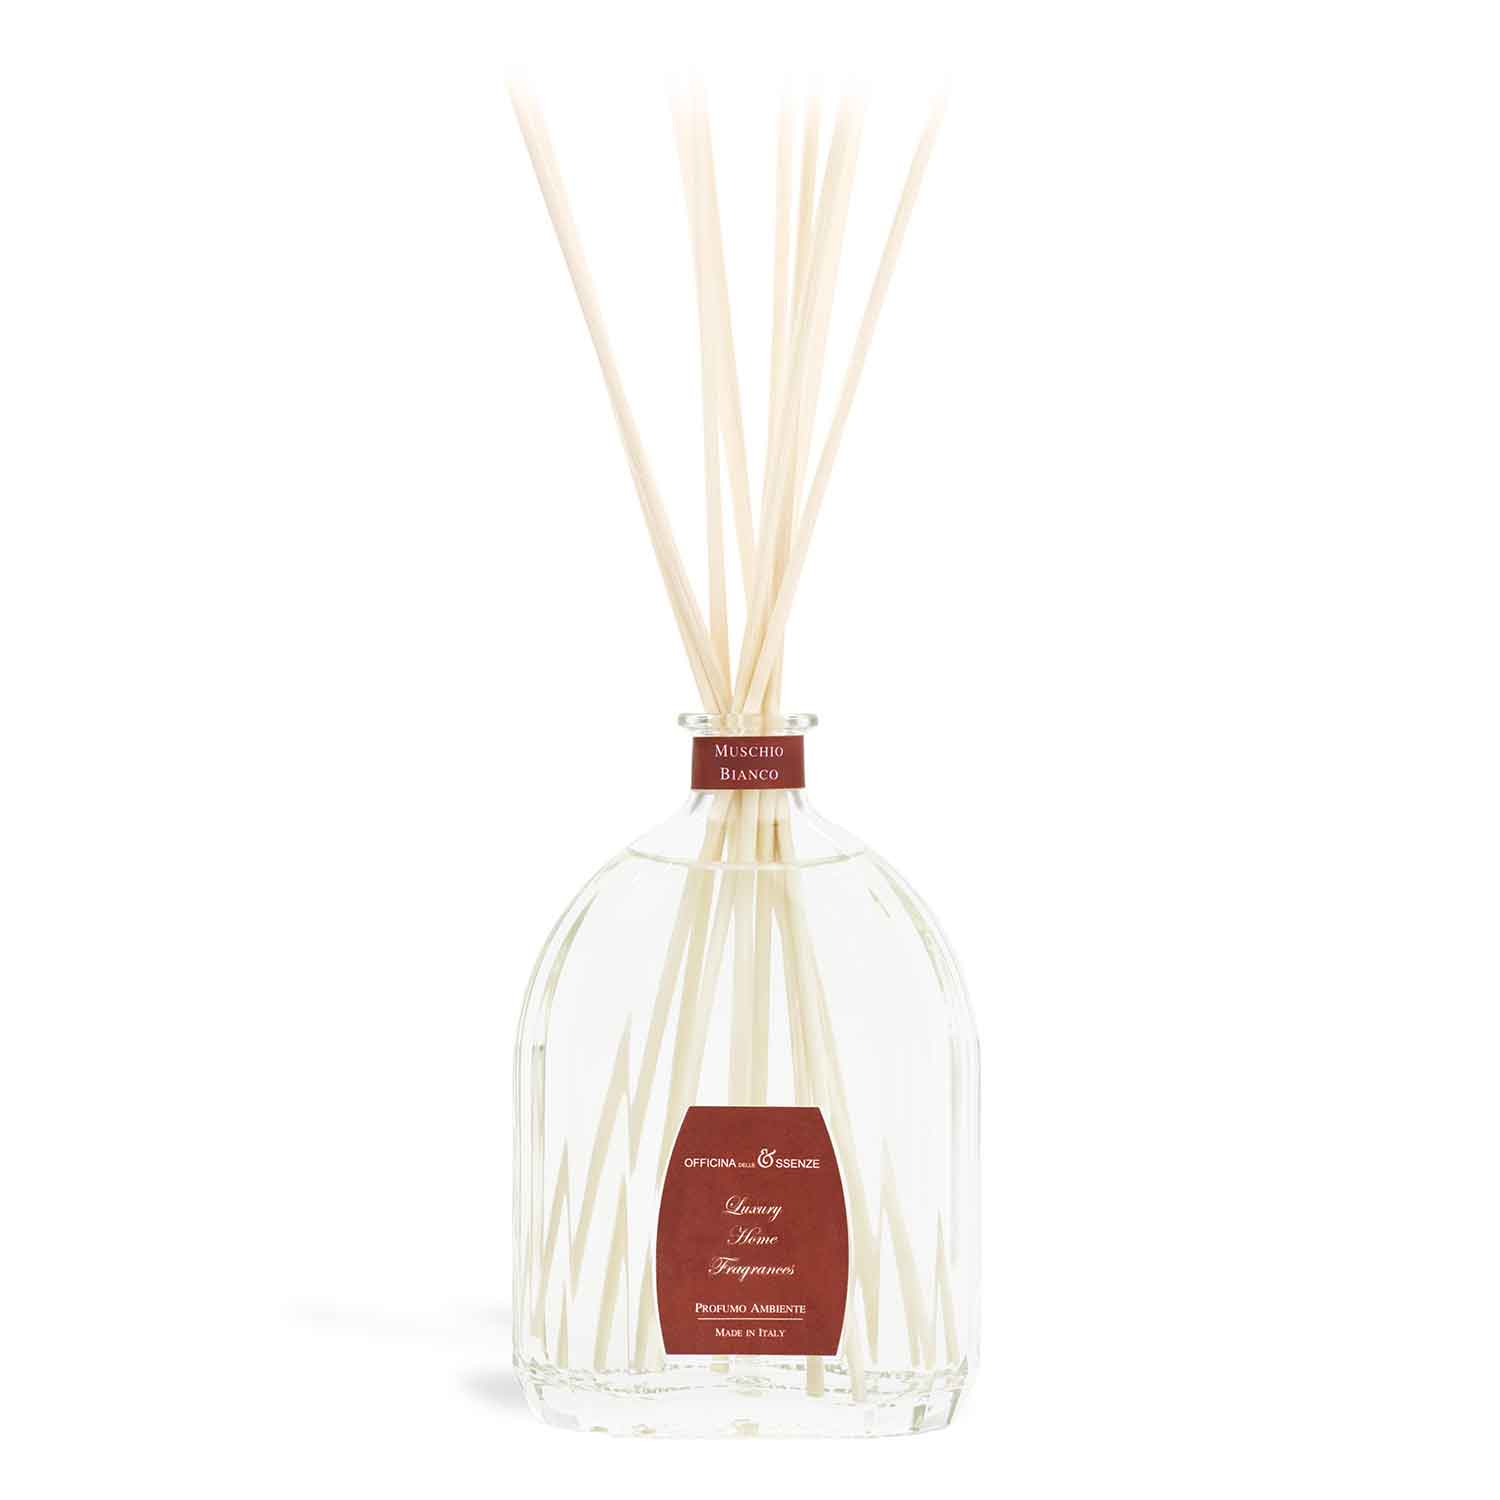 Muschio Bianco - Home fragrance diffuser with essential oils, 500 ml